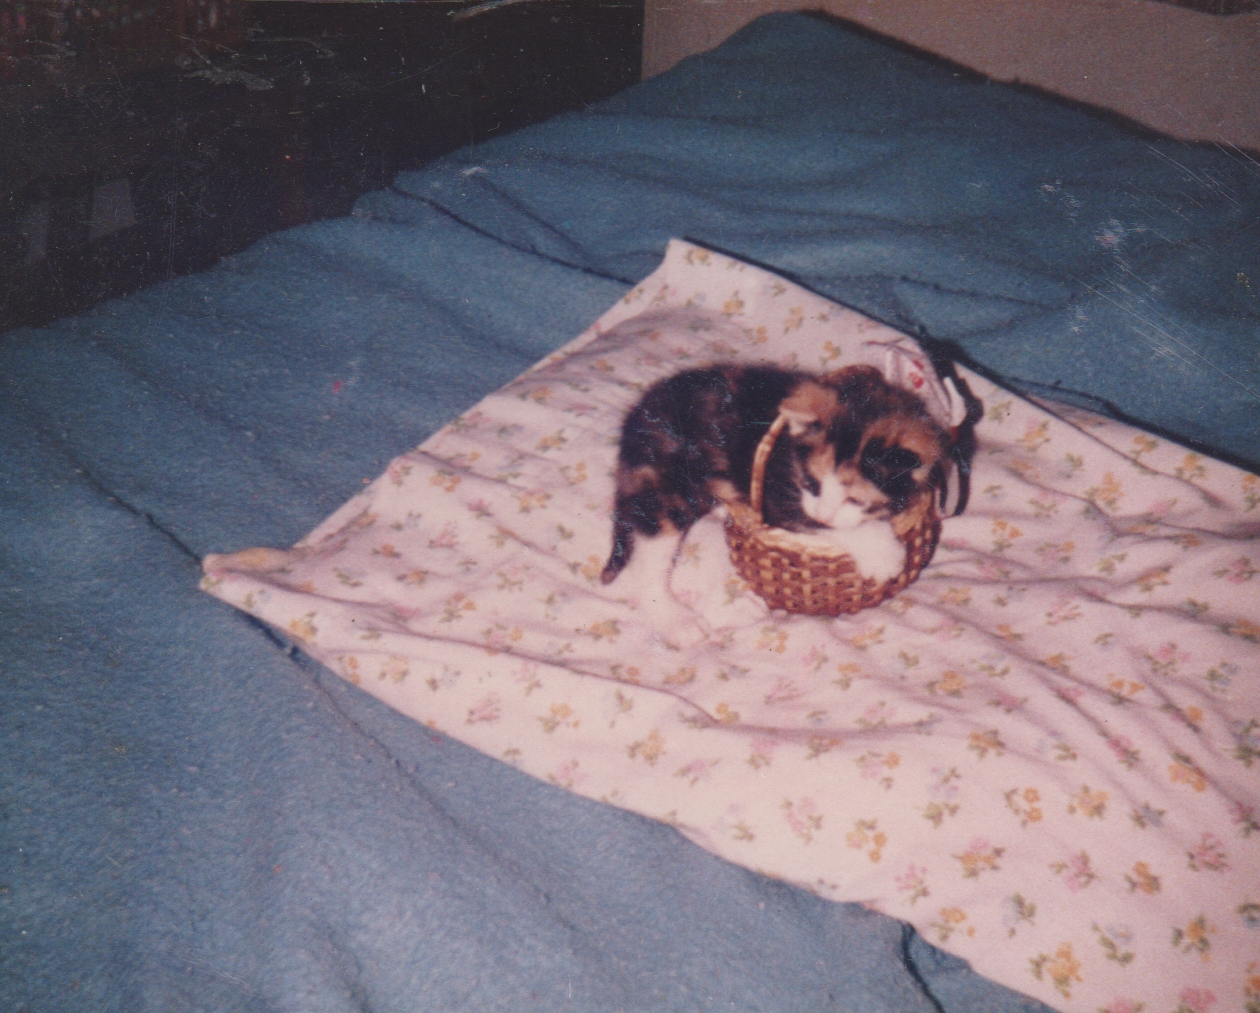 1998 maybe - a cat in a basket on mom's bed at 163.jpg